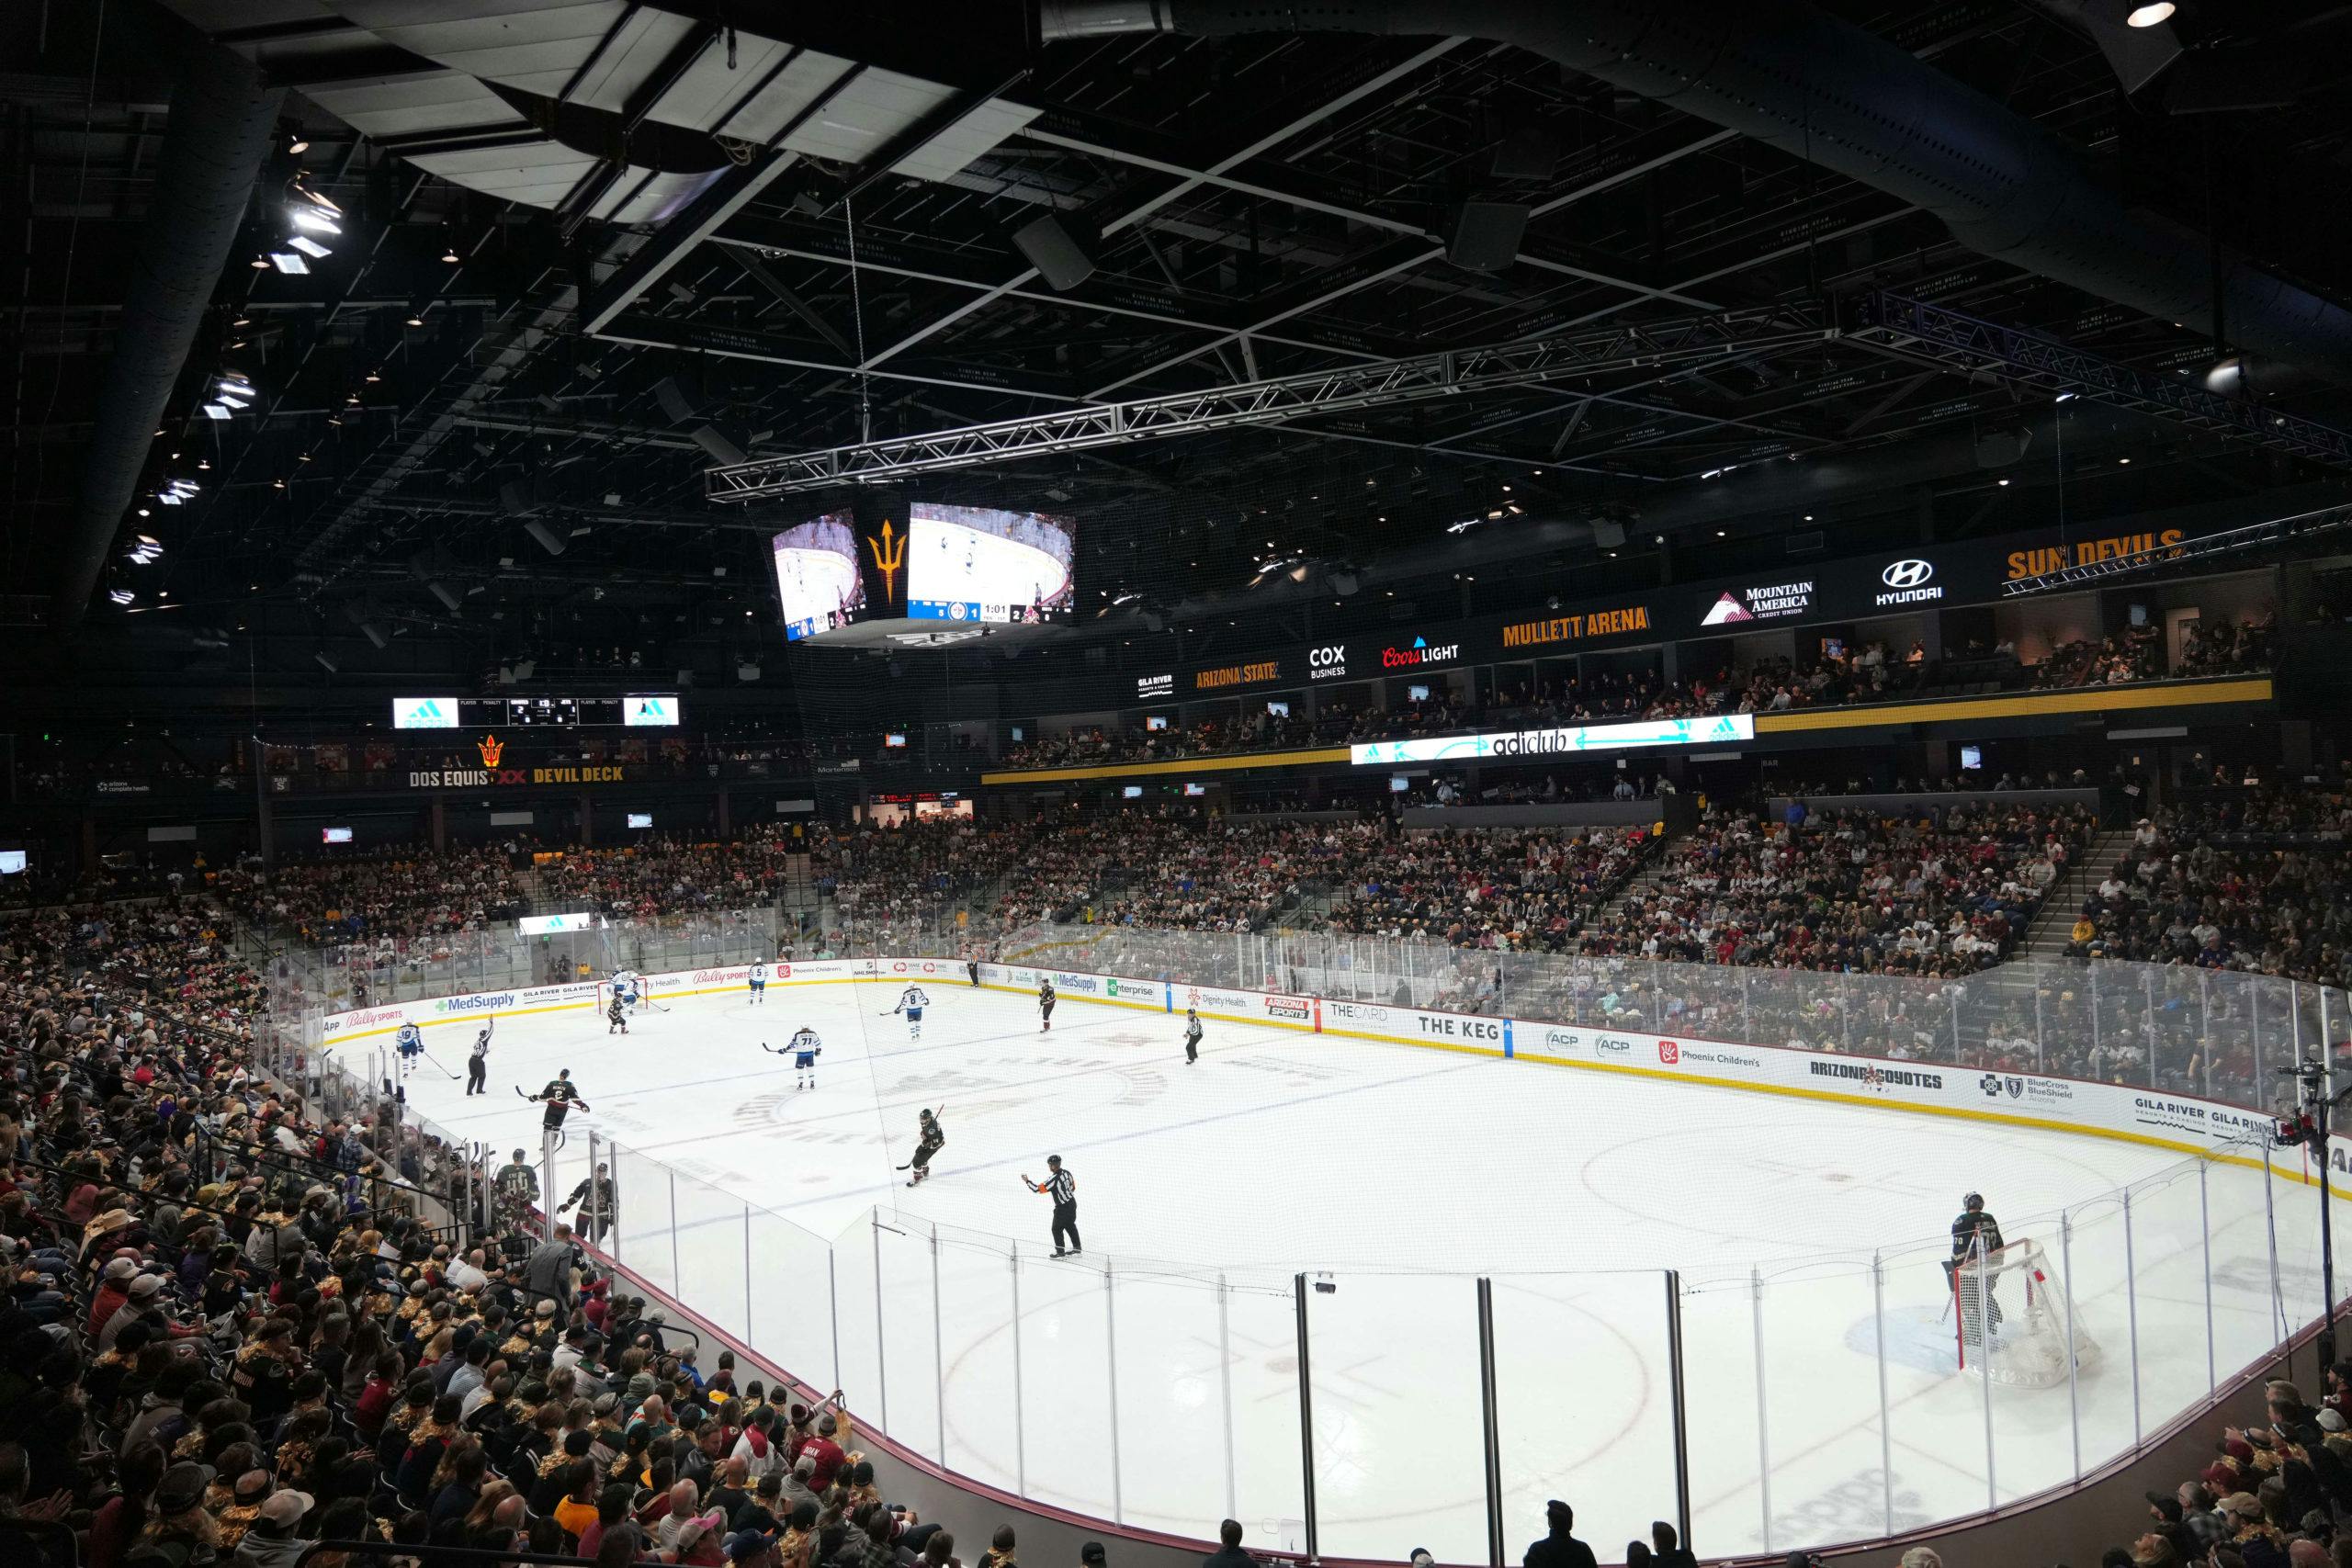 Why are the NHL's Coyotes playing at Arizona State's NCAA arena